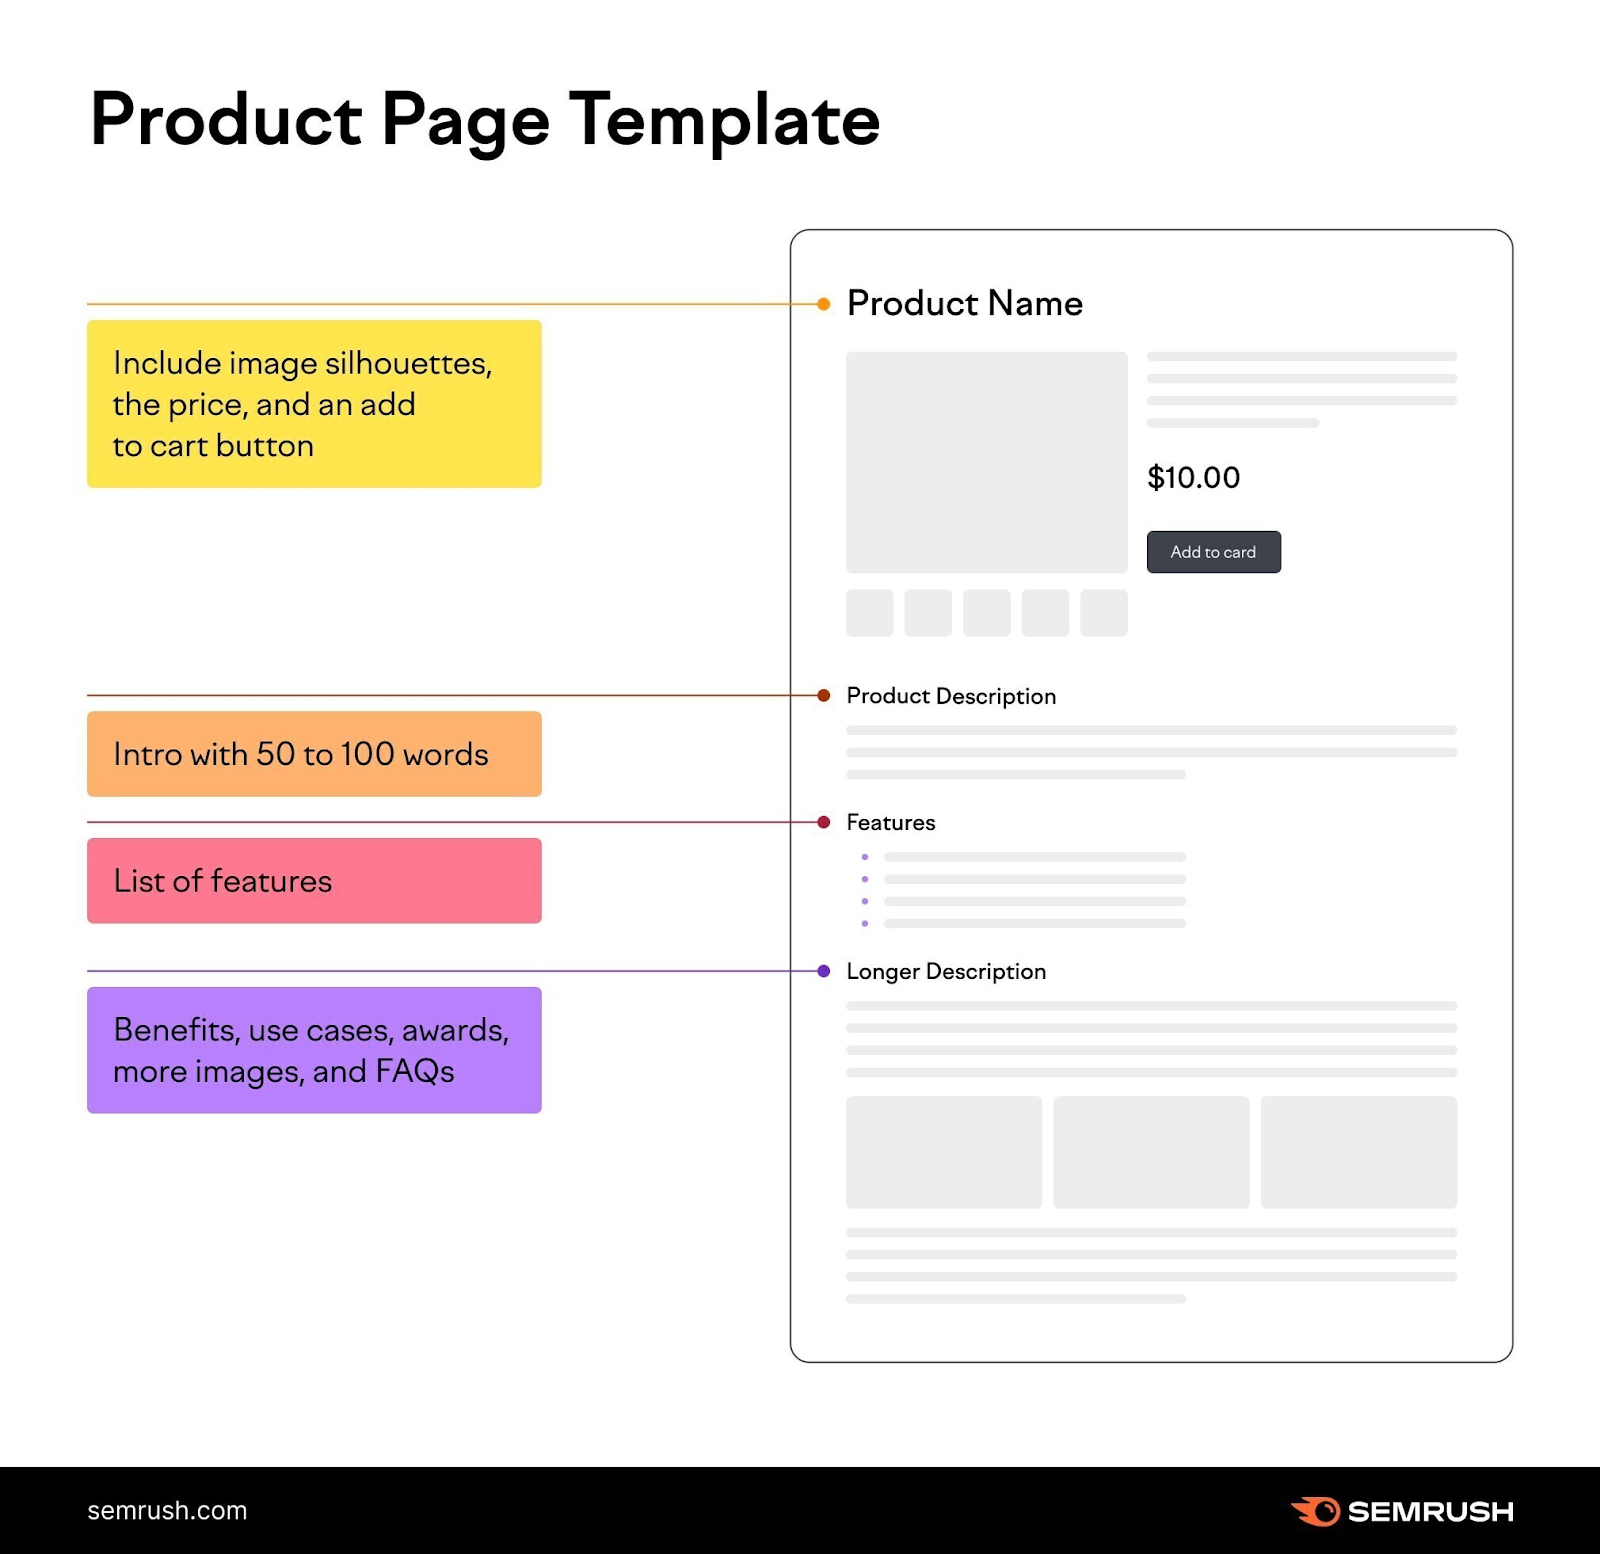 Product page template